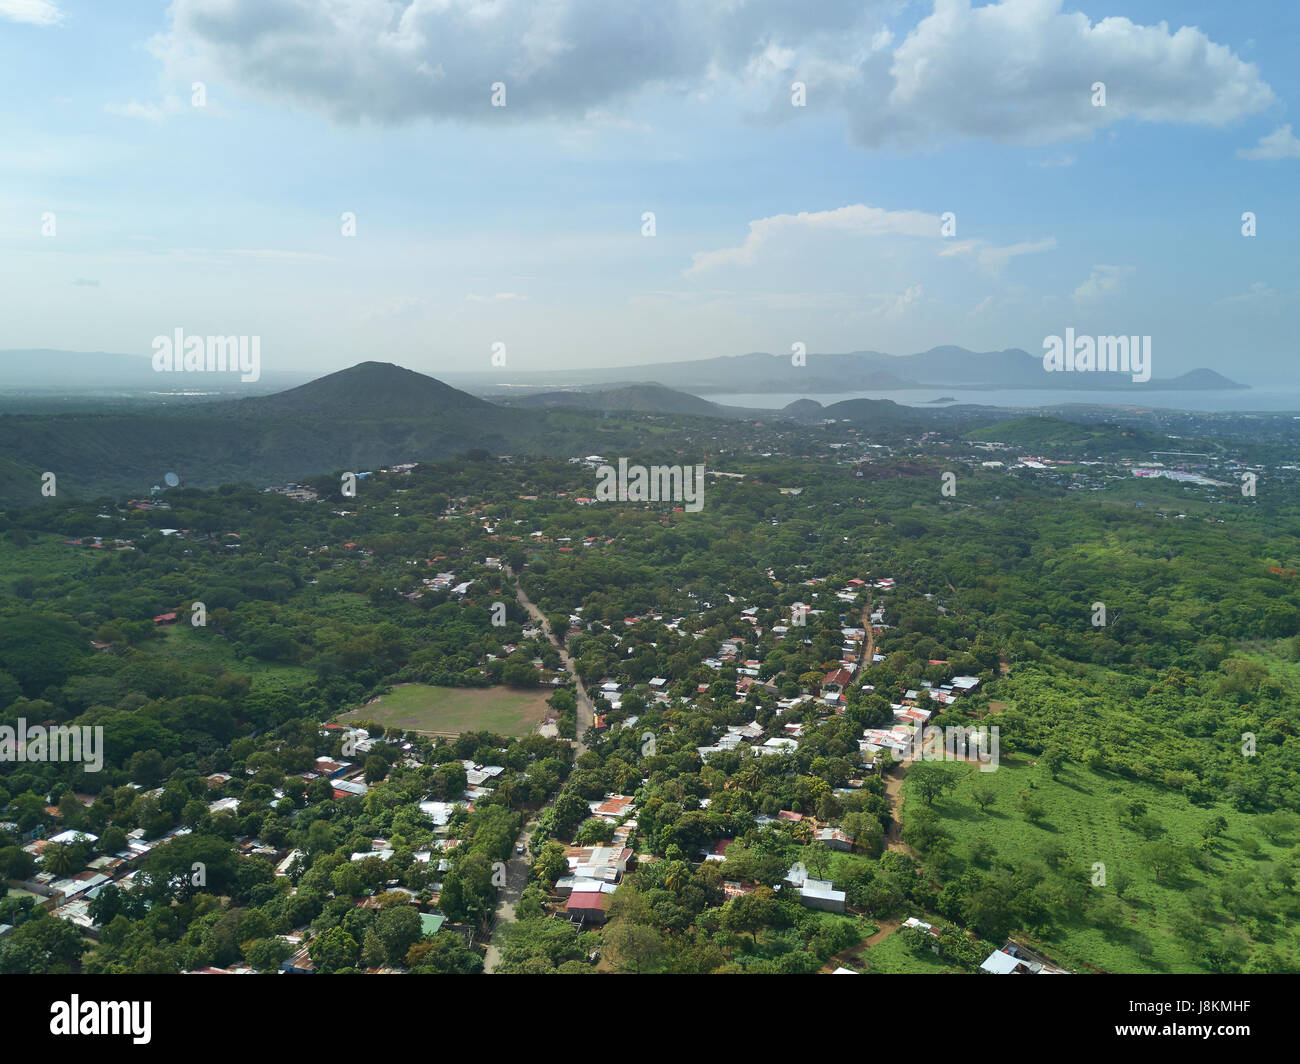 Mountain and hill landscape in Managua city aerial view. Nicaragua landscape Stock Photo